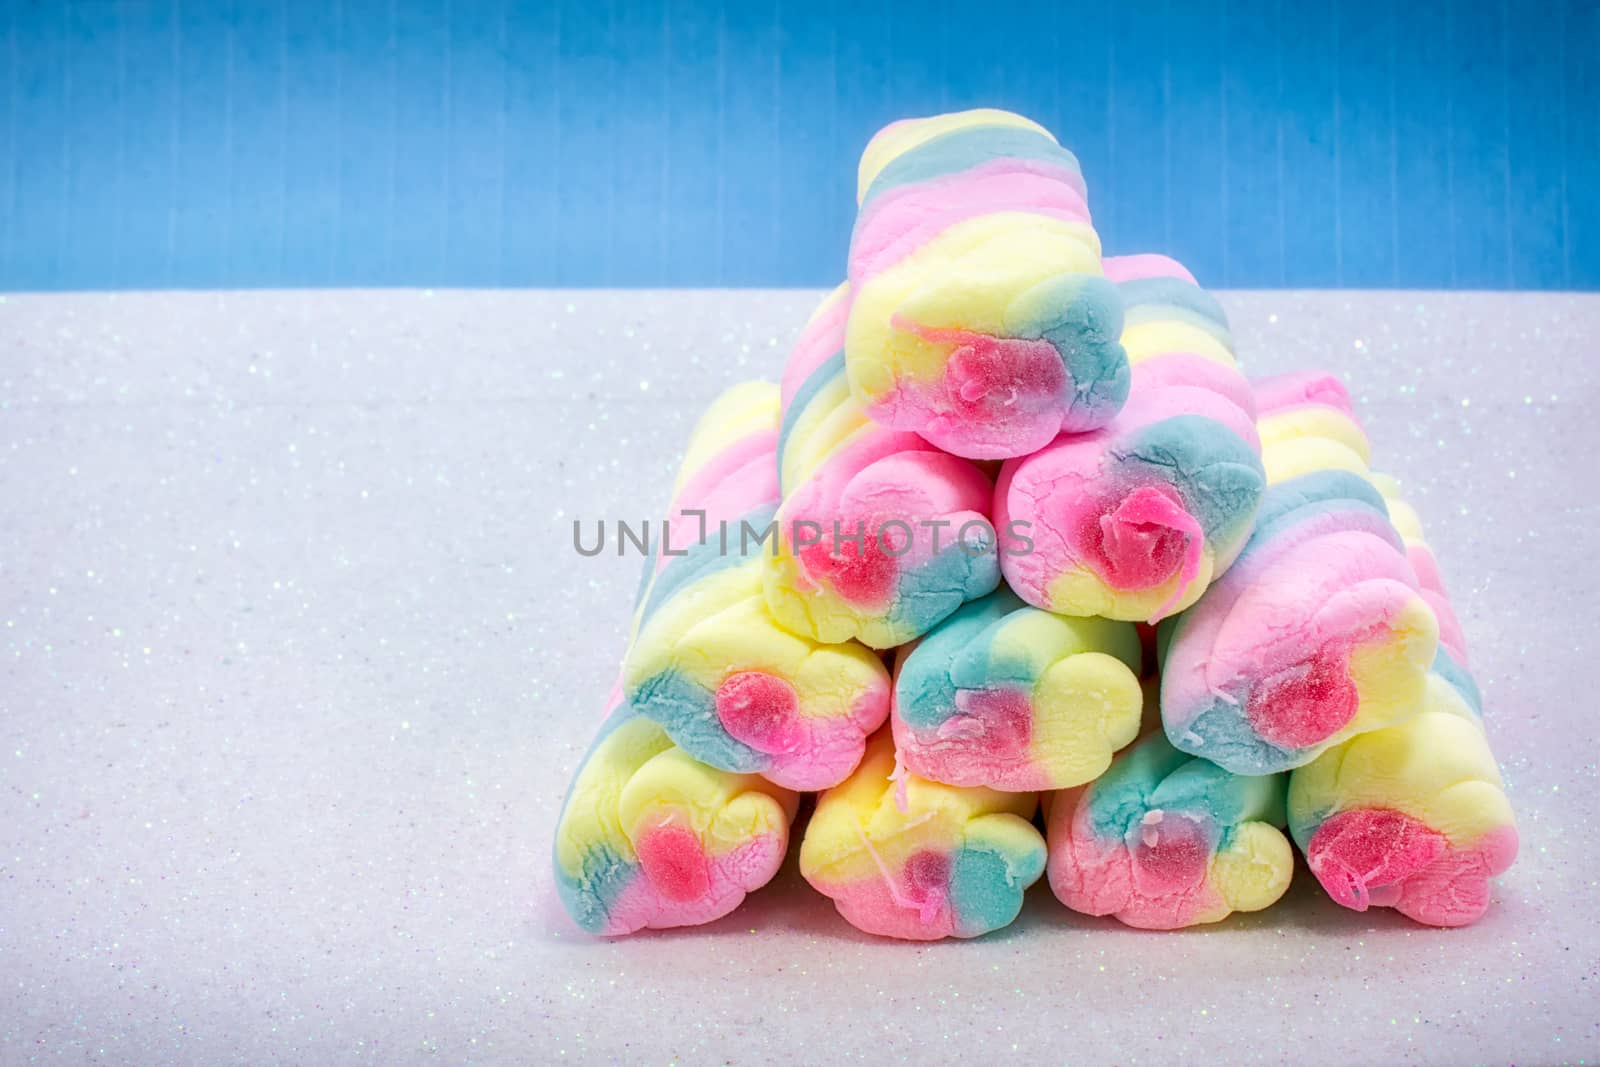 Pile of Colorful marshmallow with Sweet Fillings